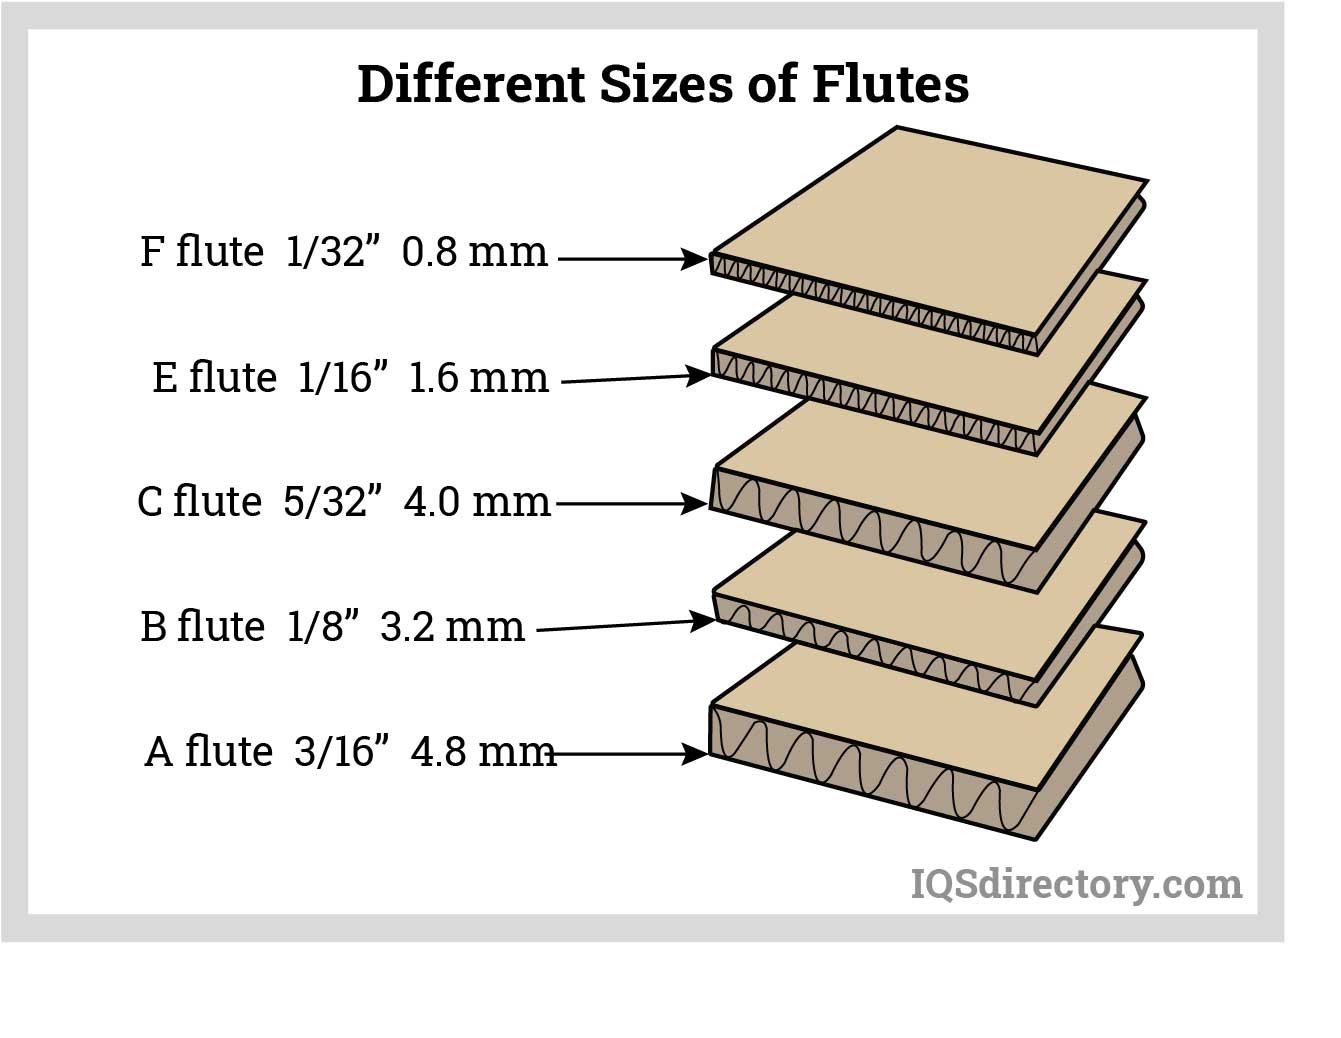 What is flute in packaging?